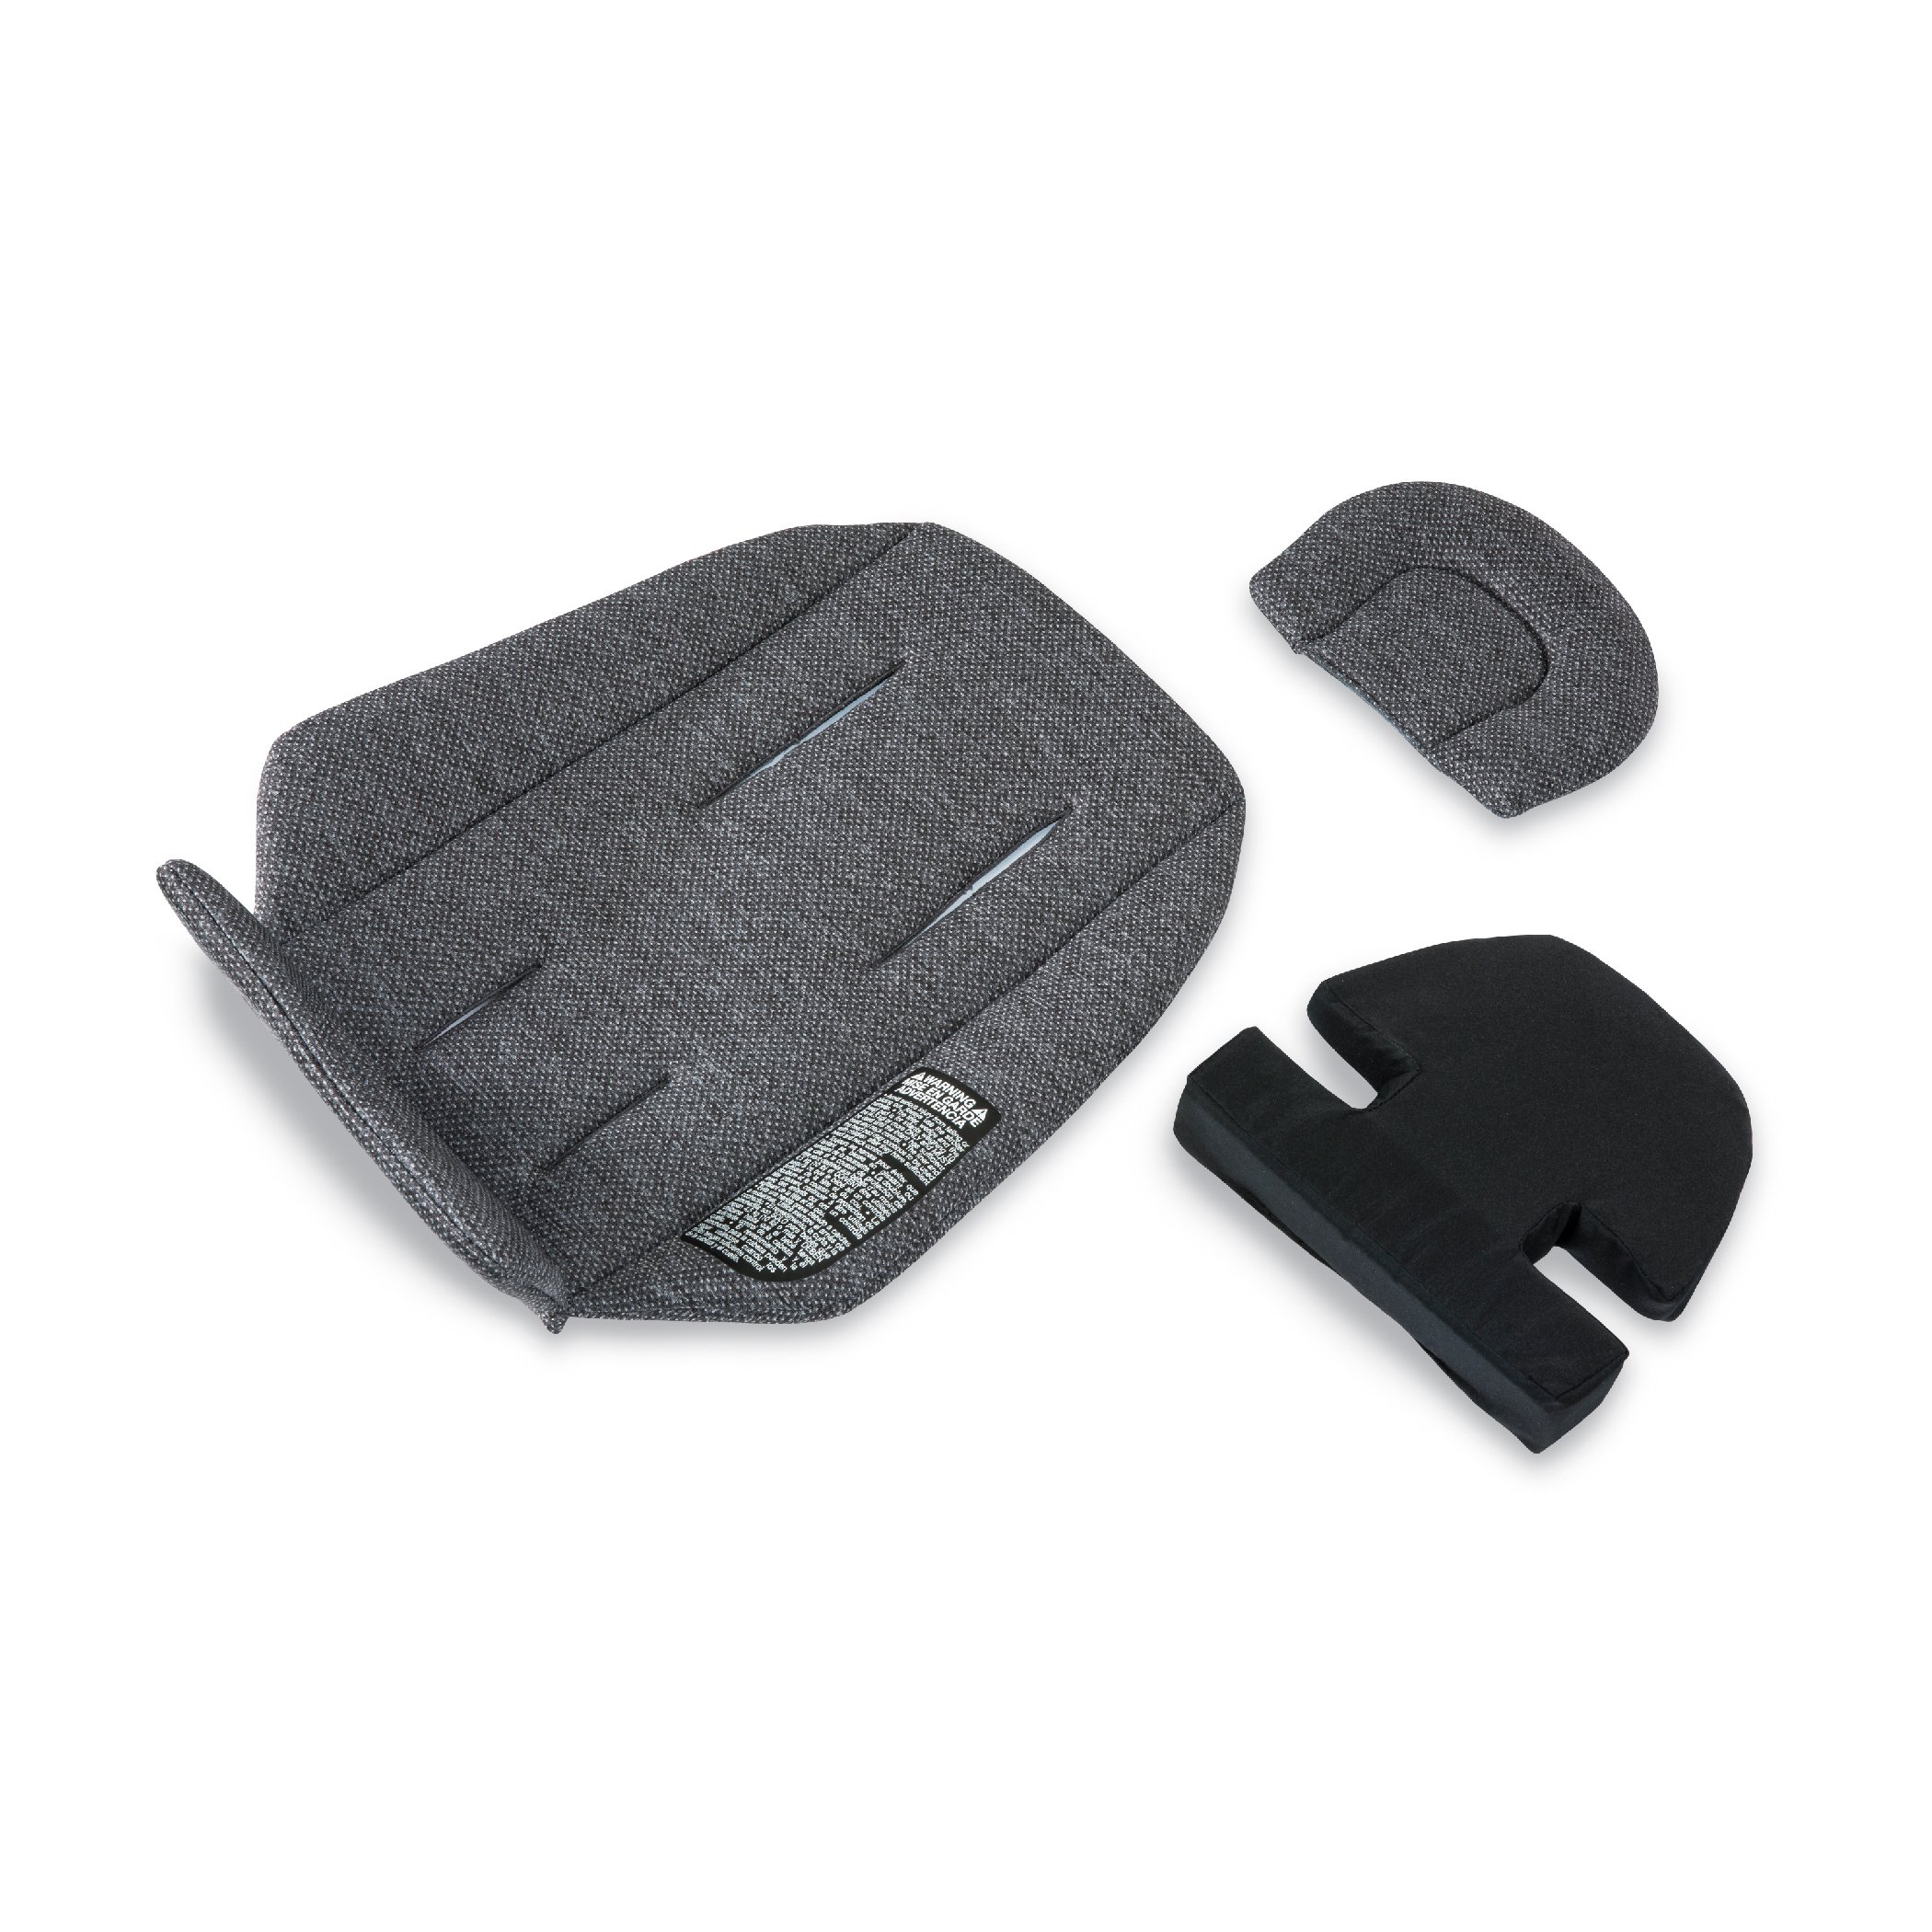 Stroller pad, adjustable headrest pillow, and support wedge (Copy)